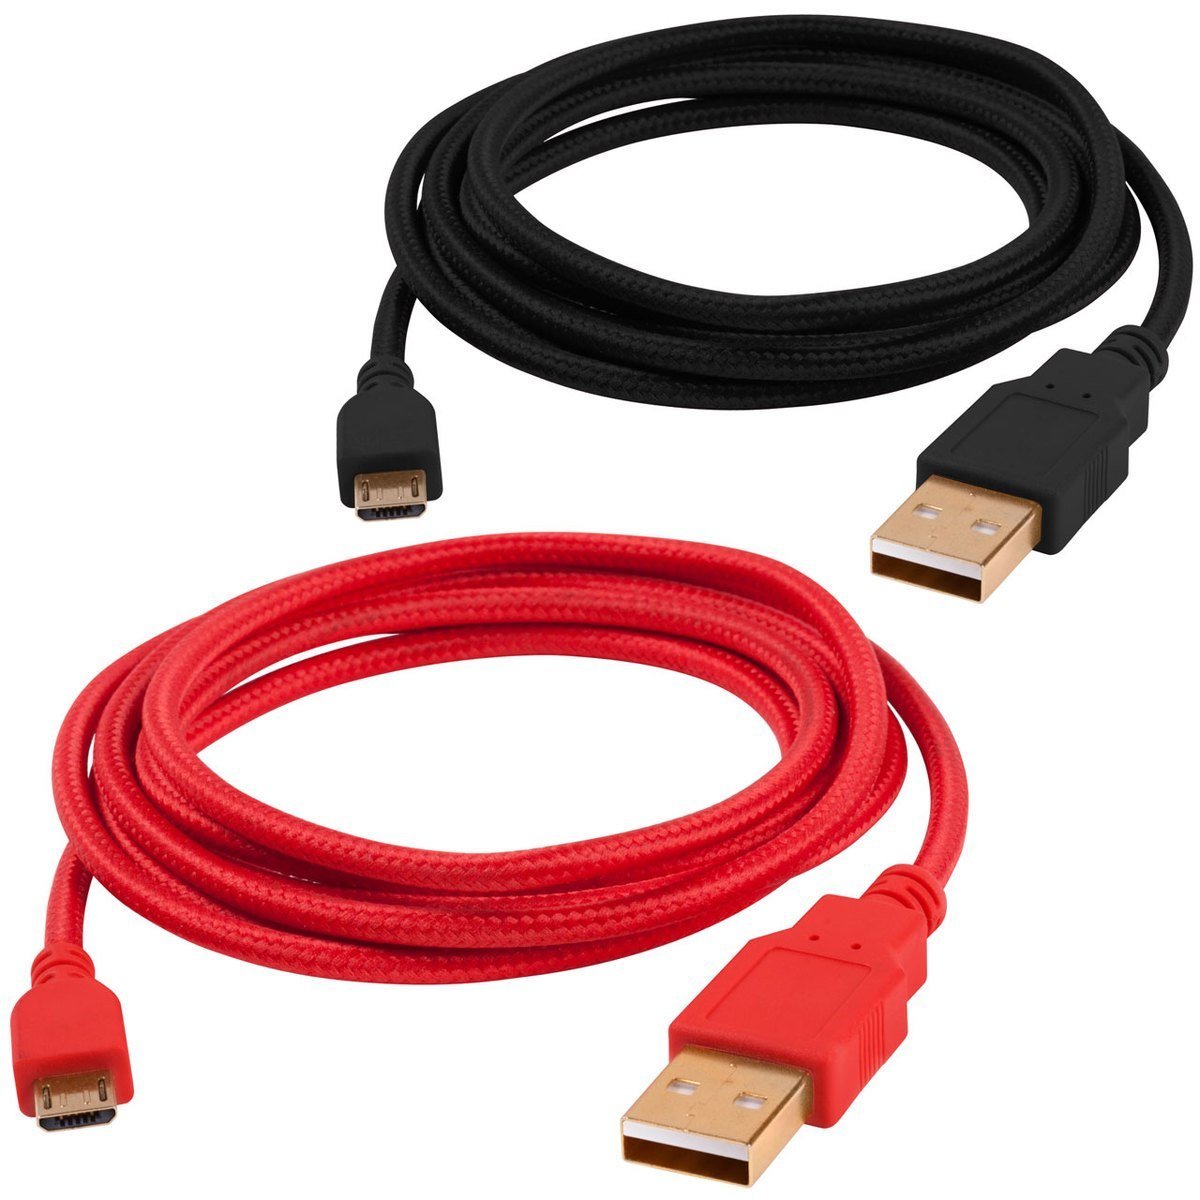 iSound Micro USB Cable - 2 Pack, Red & Black - Store 974 | ستور ٩٧٤